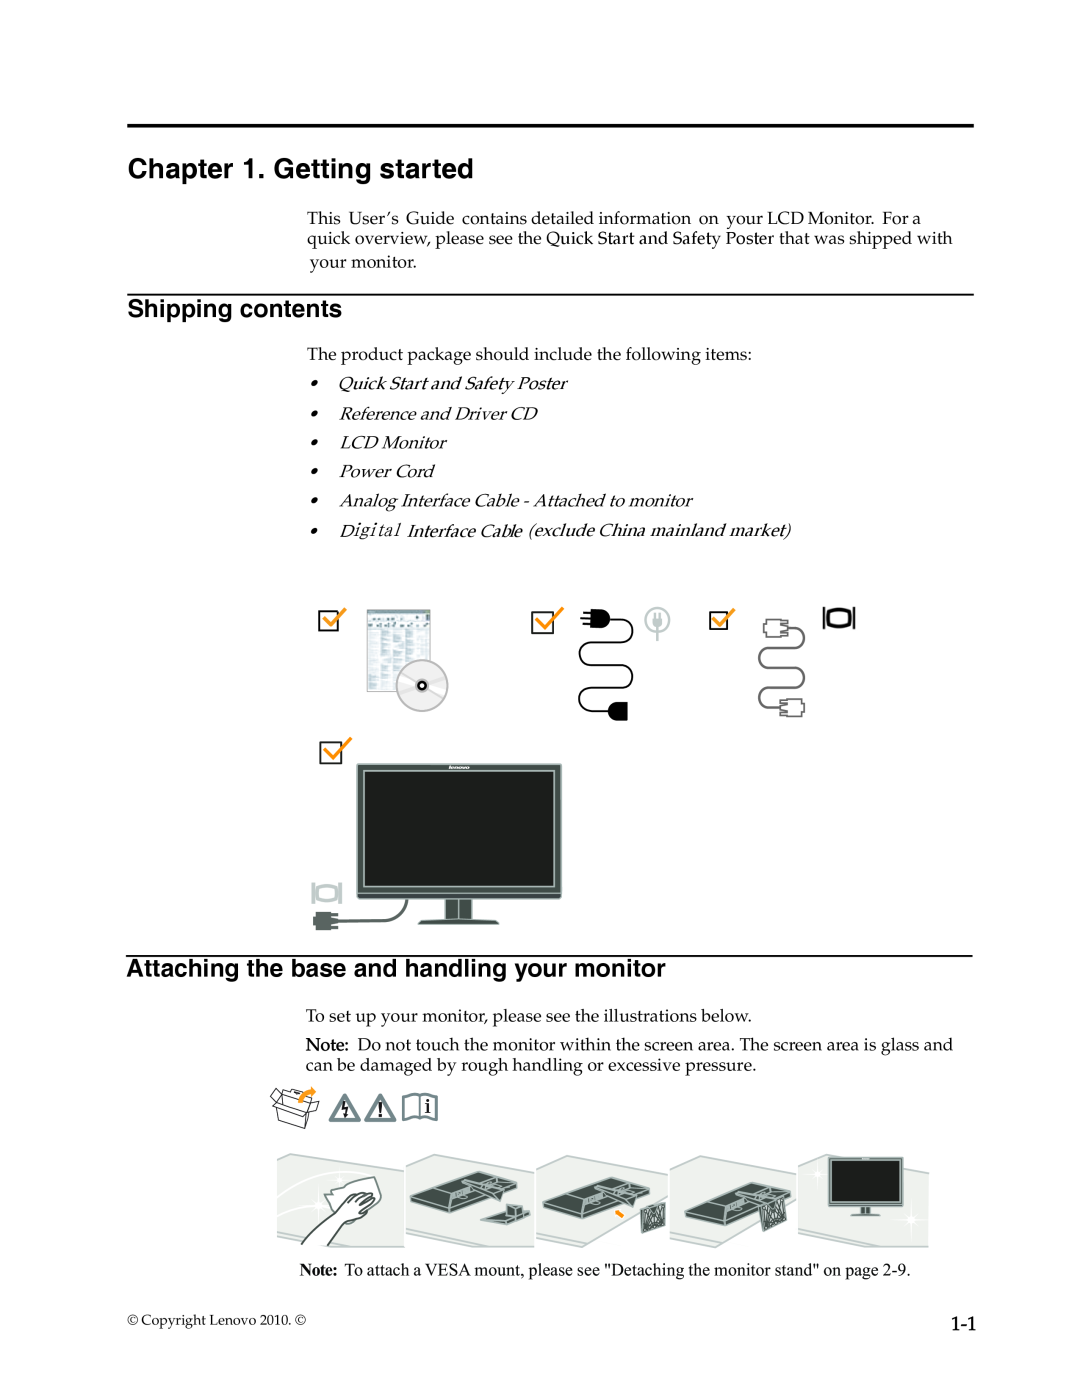 Lenovo L2021 manual Getting started, Shipping contents, Attaching the base and handling your monitor 